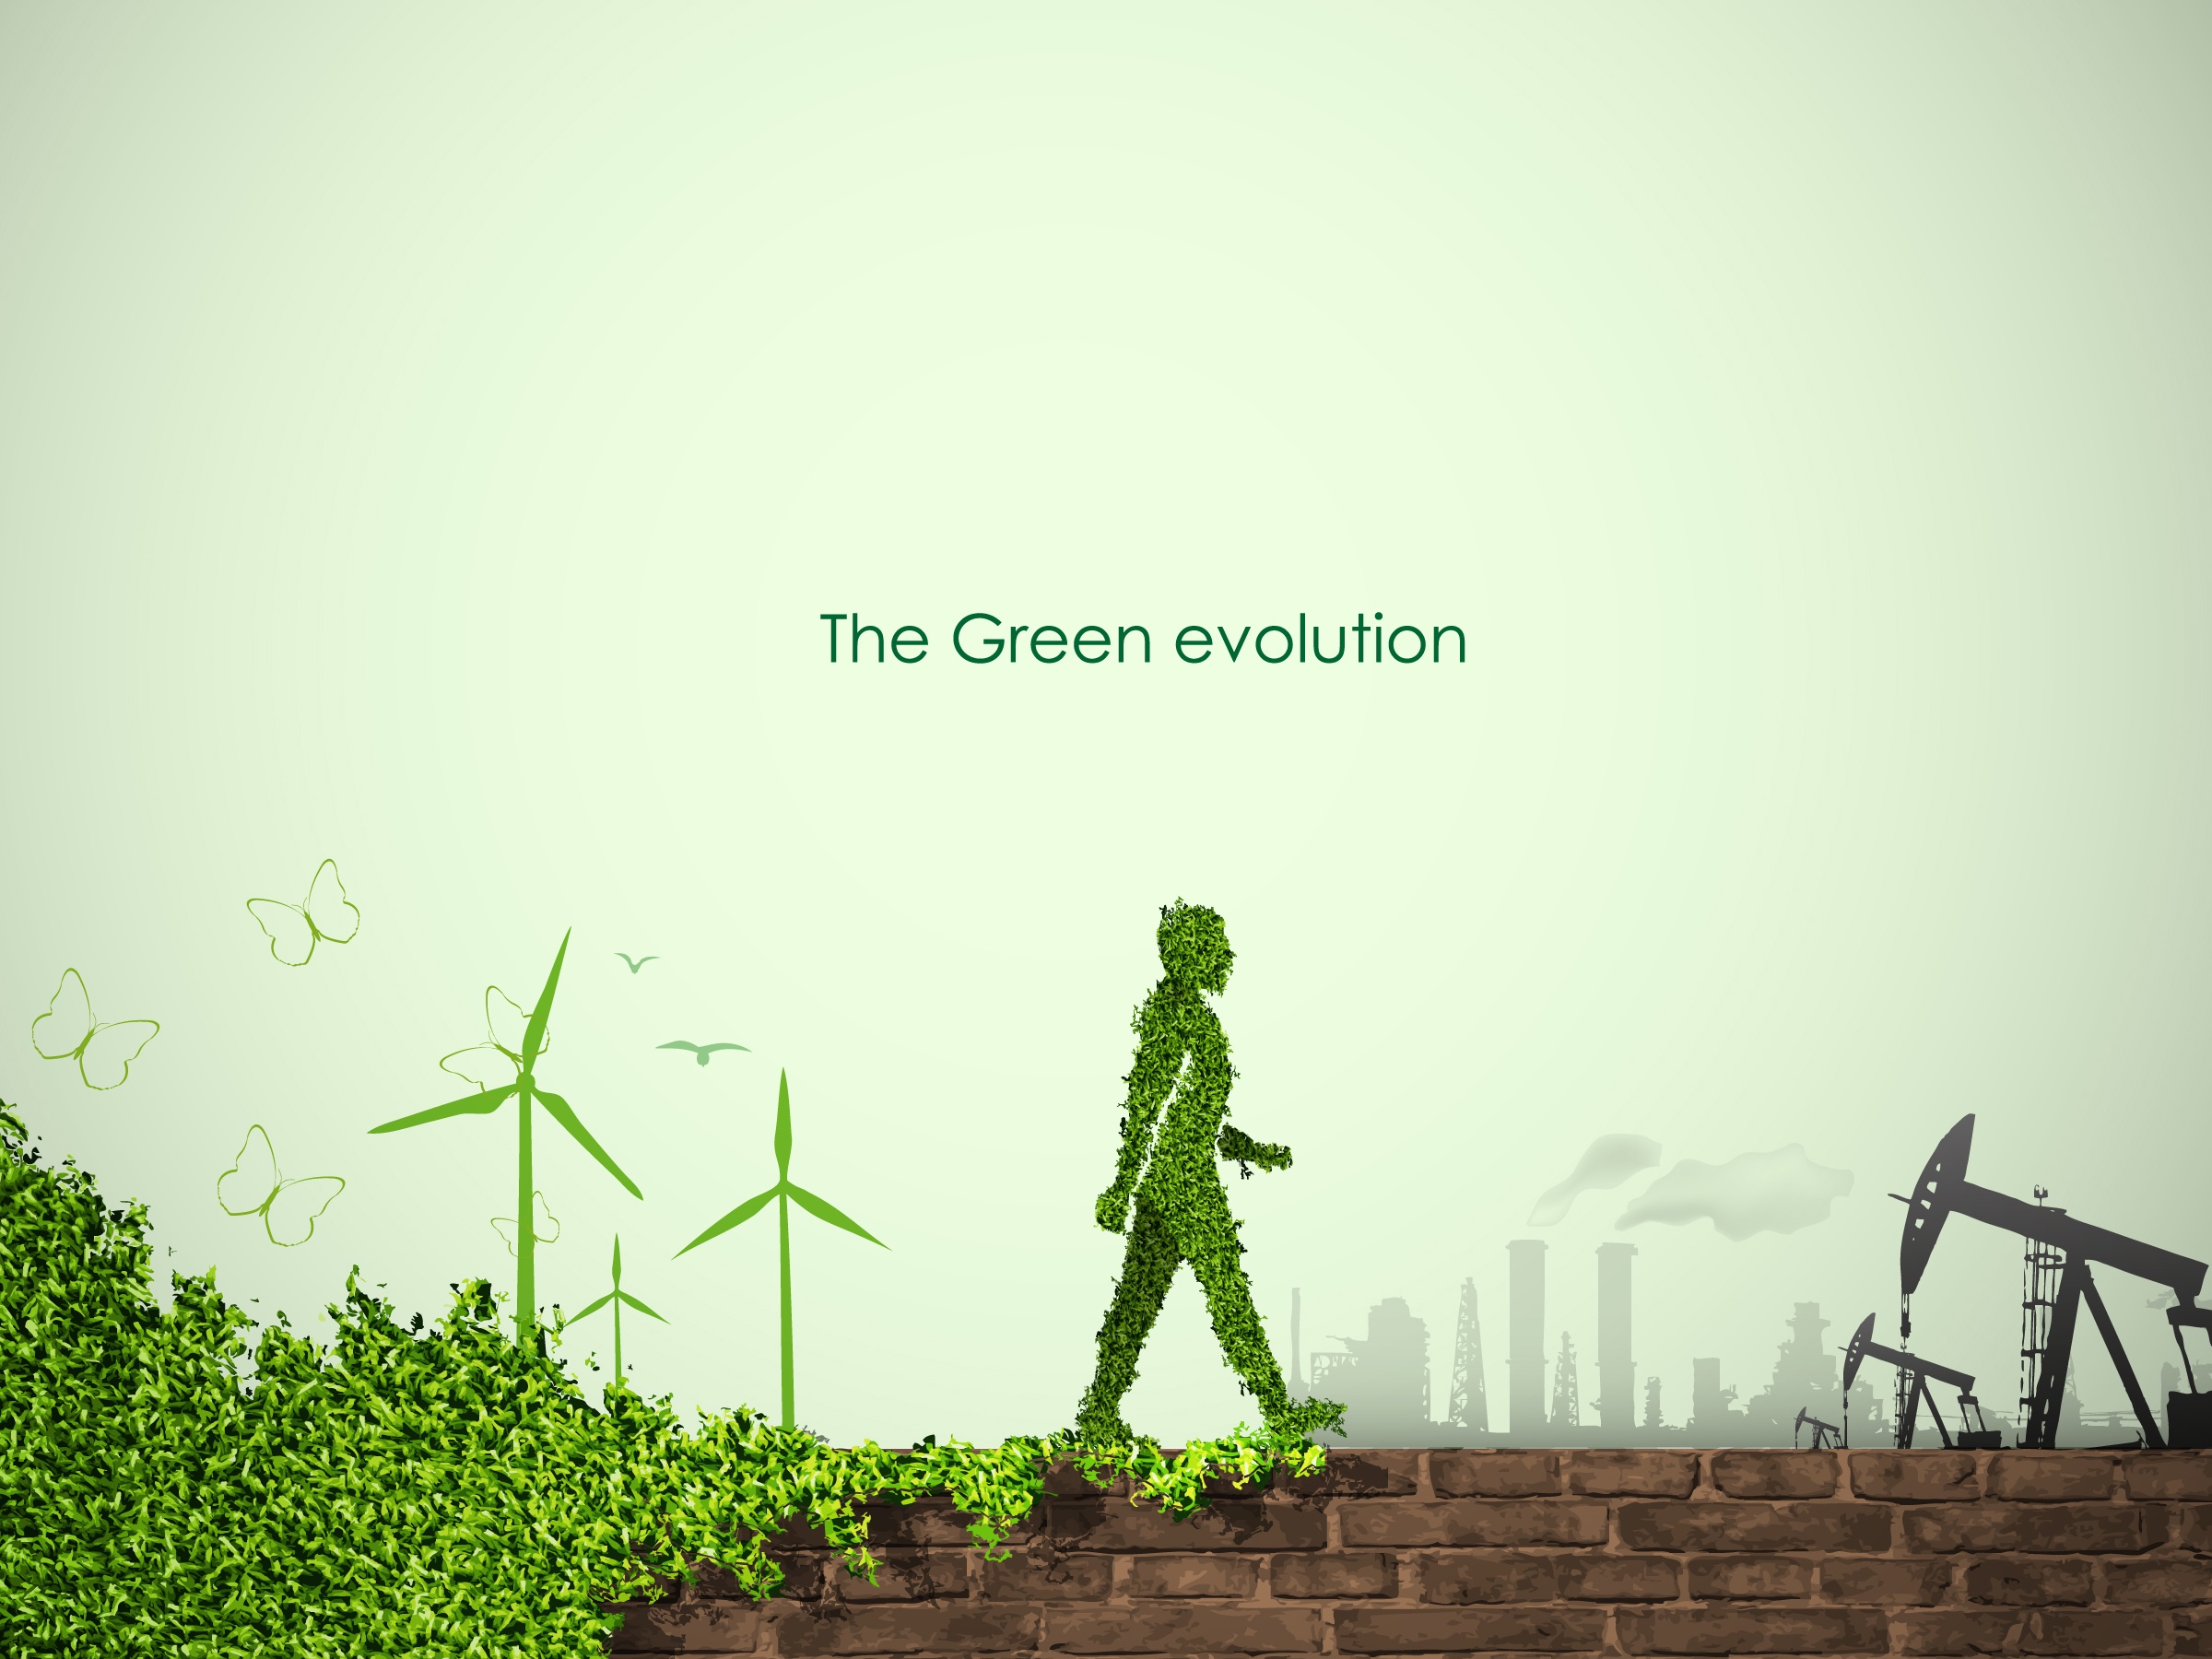 The Green Evolution - Solution to climate change